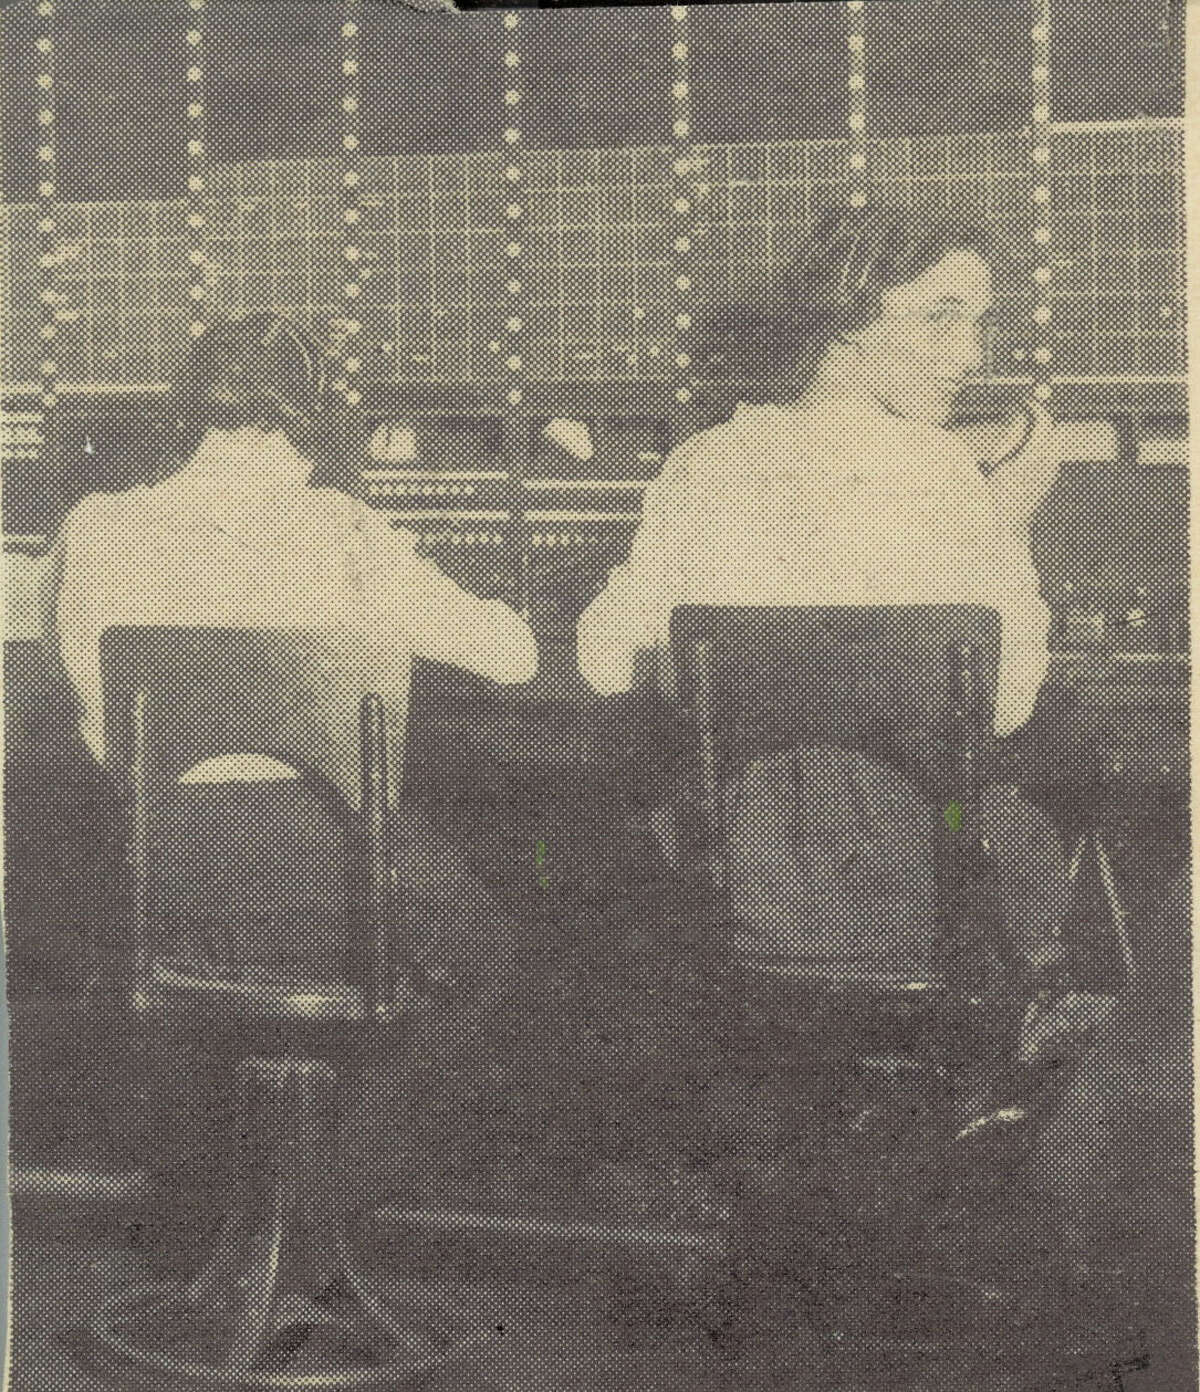 An operator at central switchboard at Southwestern Bell Telephone Co. in 1916.